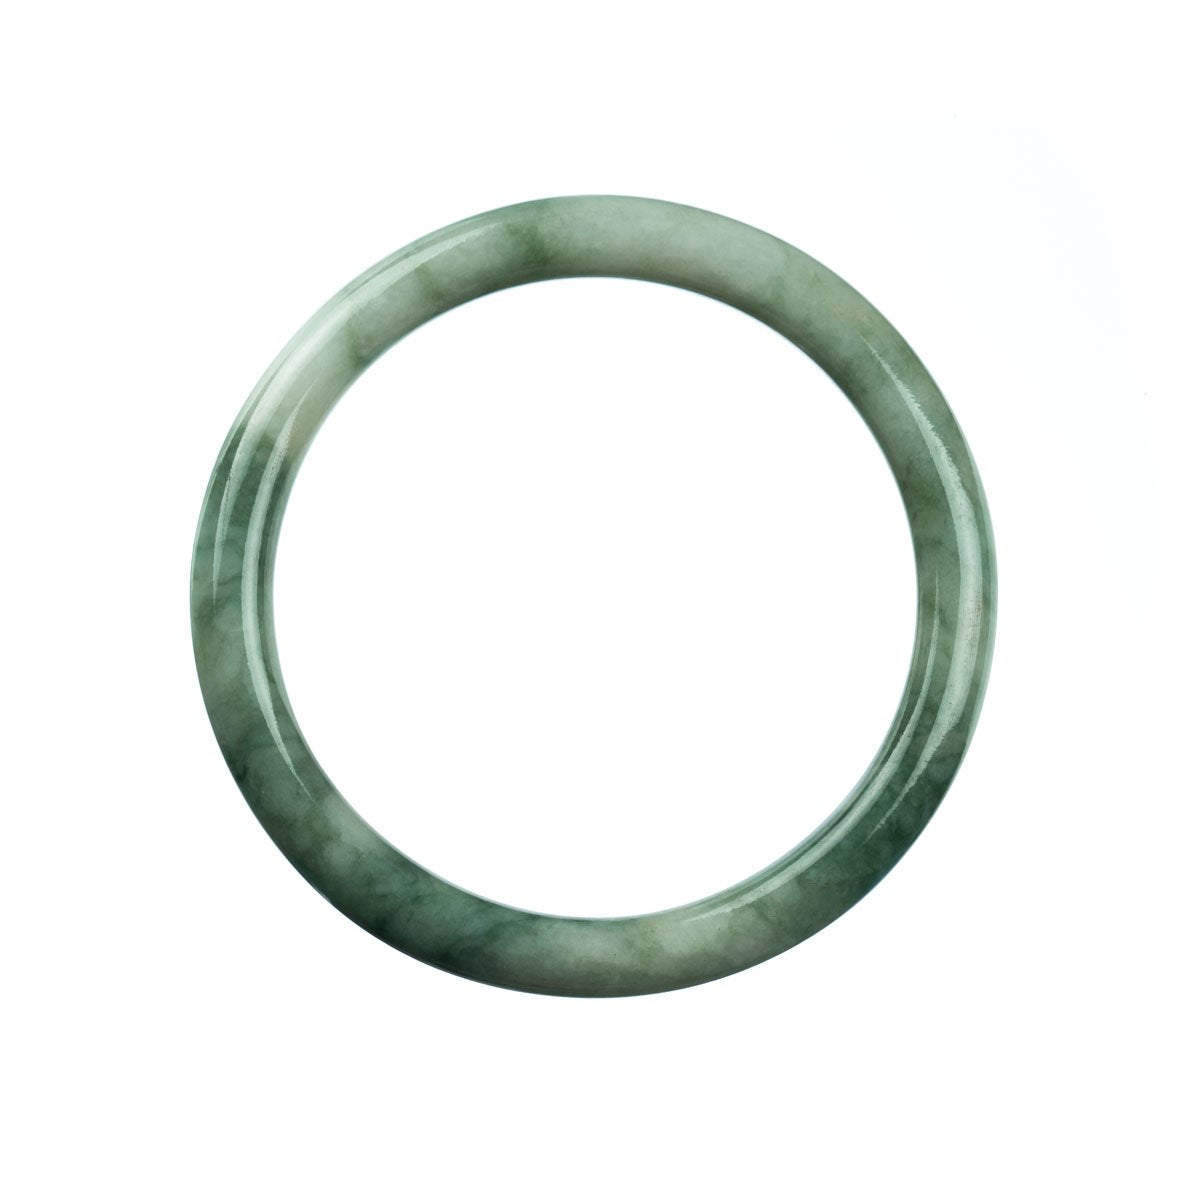 A round green jade bangle with a 61mm diameter, made from genuine Grade A traditional jade.